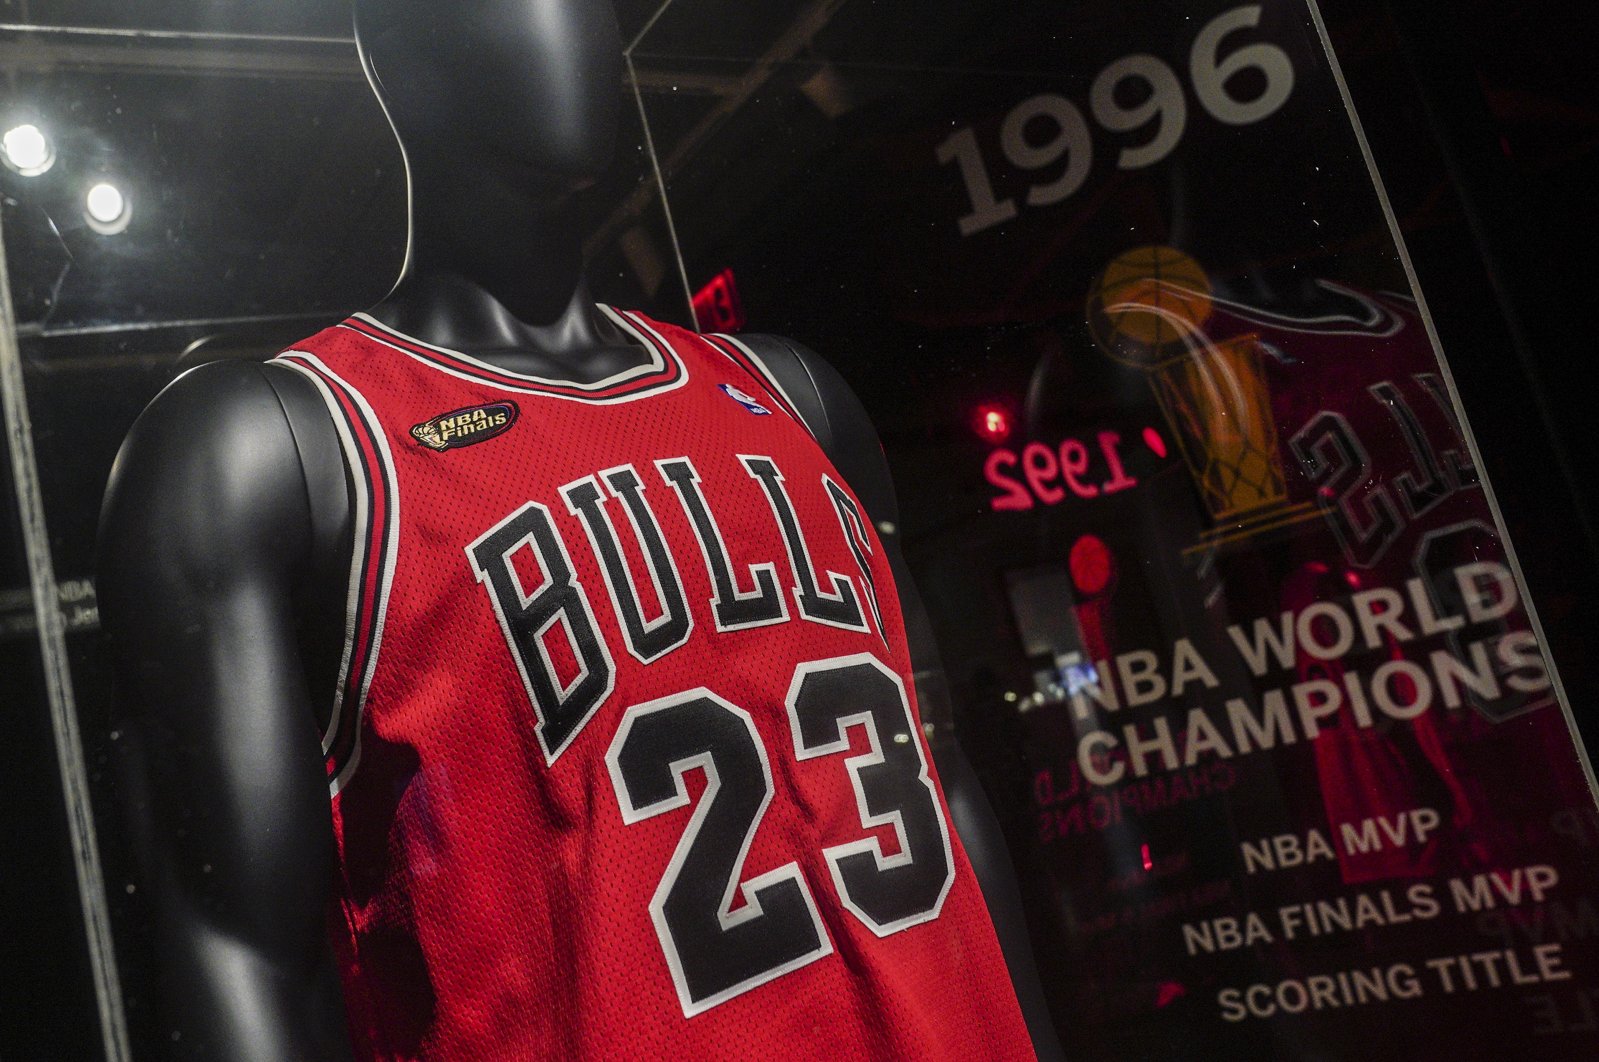 Michael Jordan&#039;s 1998 finals game jersey is displayed in a glass case, New York, U.S., Sept. 6, 2022. (AP Photo)